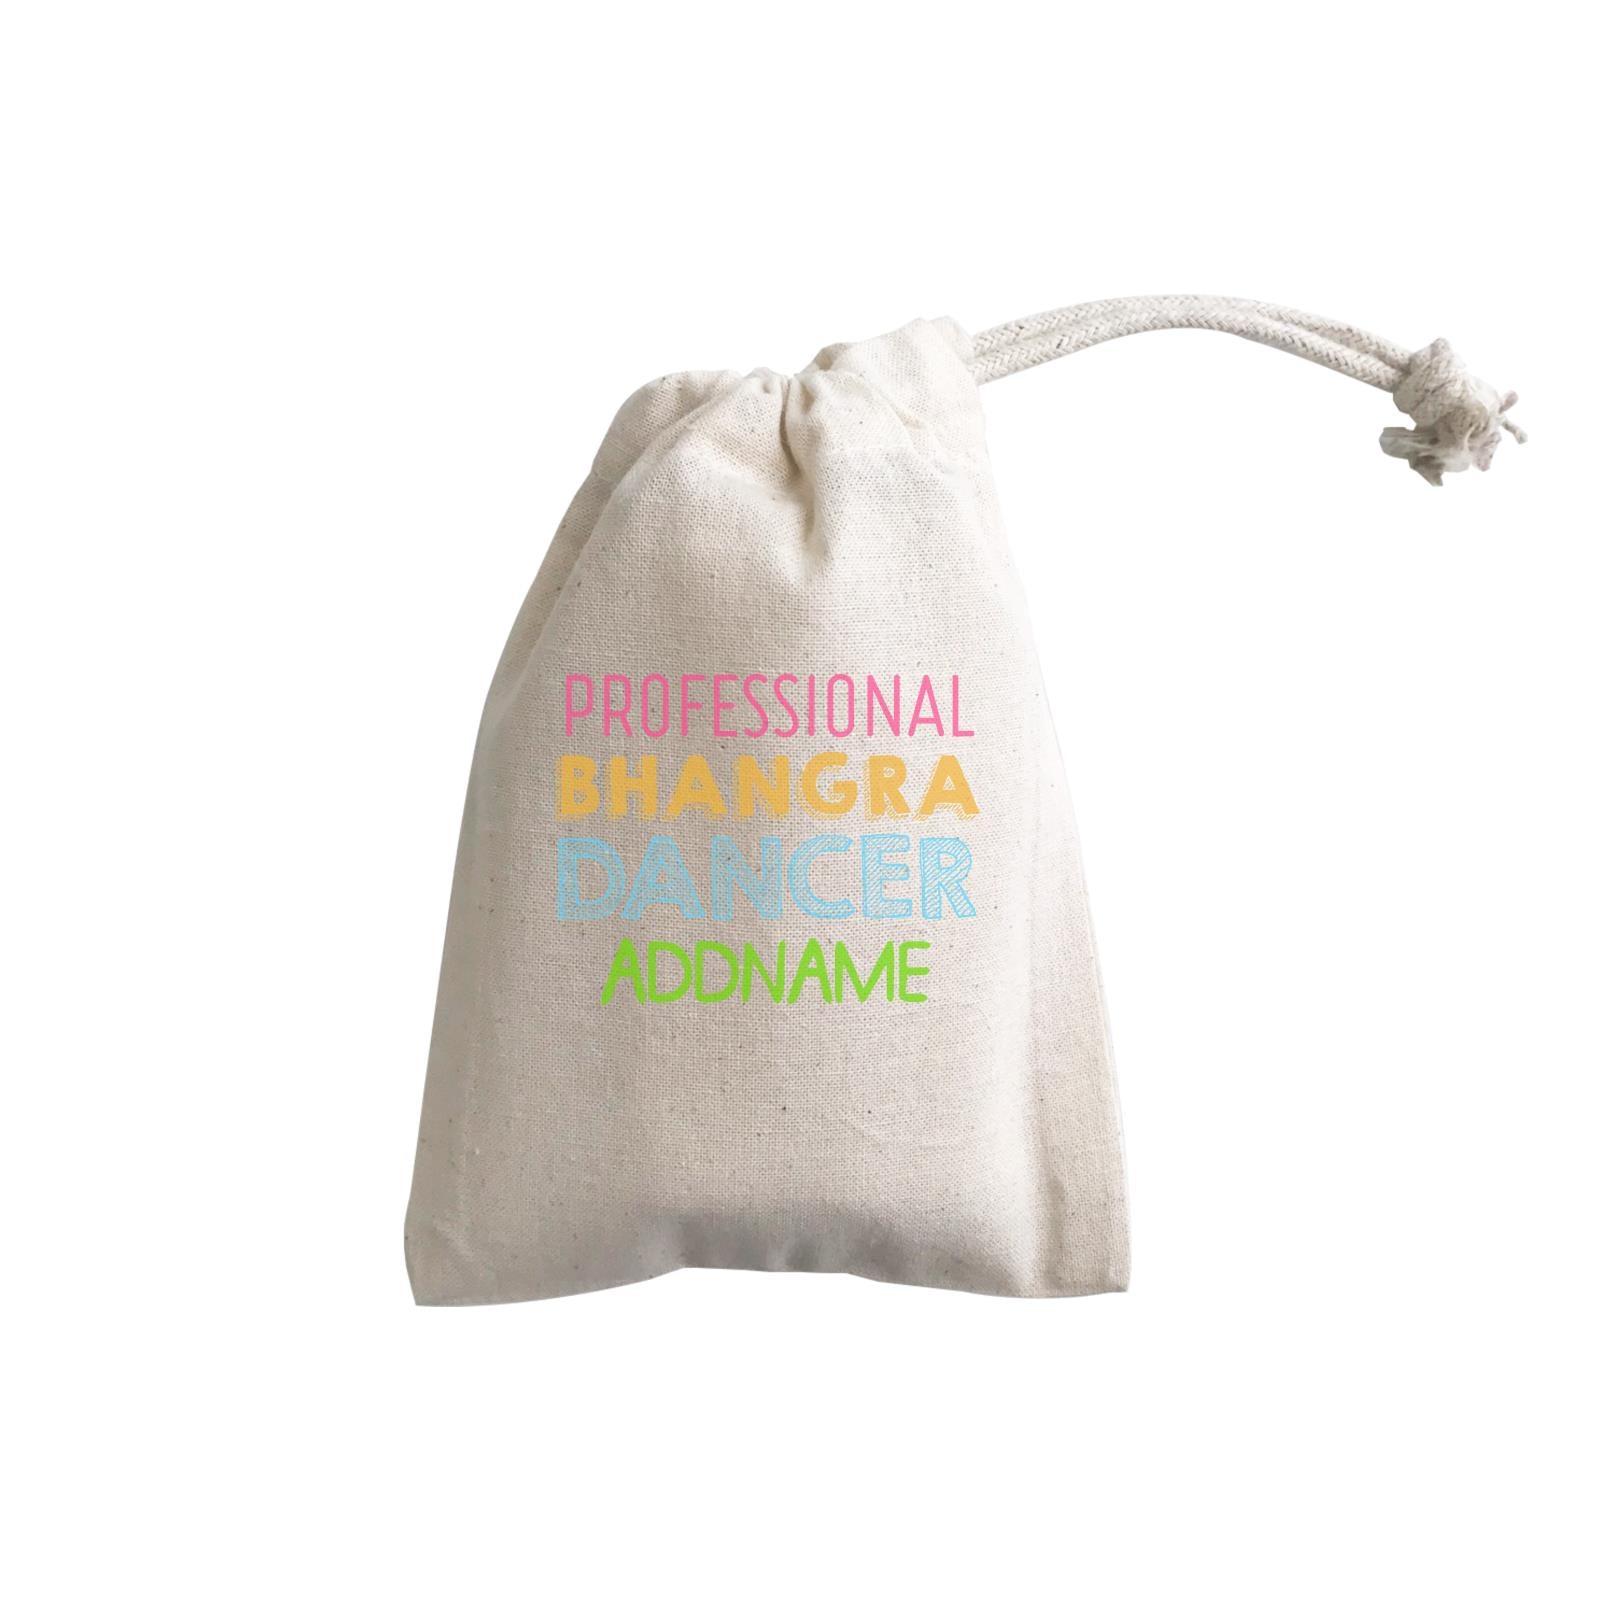 Professional Bhangra Dancer Addname GP Gift Pouch